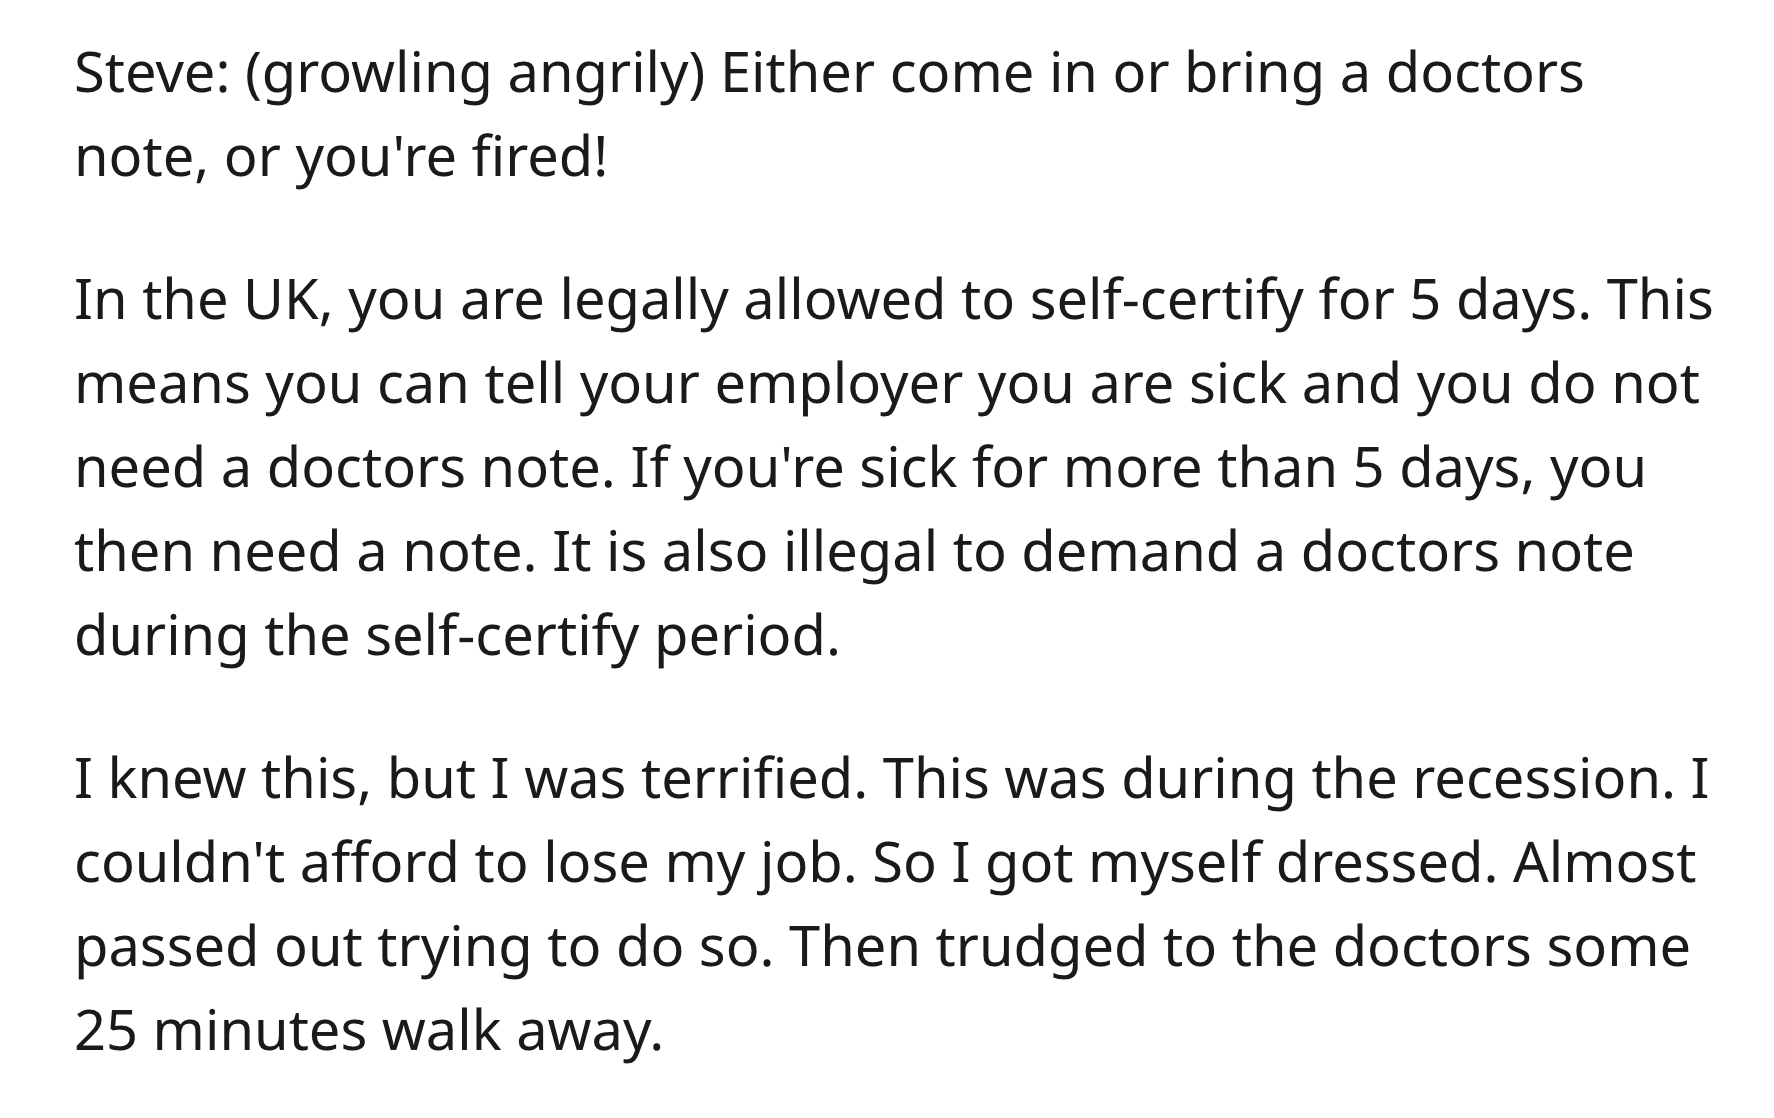 Boss Illegally Demands Doctor’s Note, So Doctor Recommends 2 Weeks Off - Property - Steve growling angrily Either come in or bring a doctors note, or you're fired! In the Uk, you are legally allowed to selfcertify for 5 days. This means you can tell your